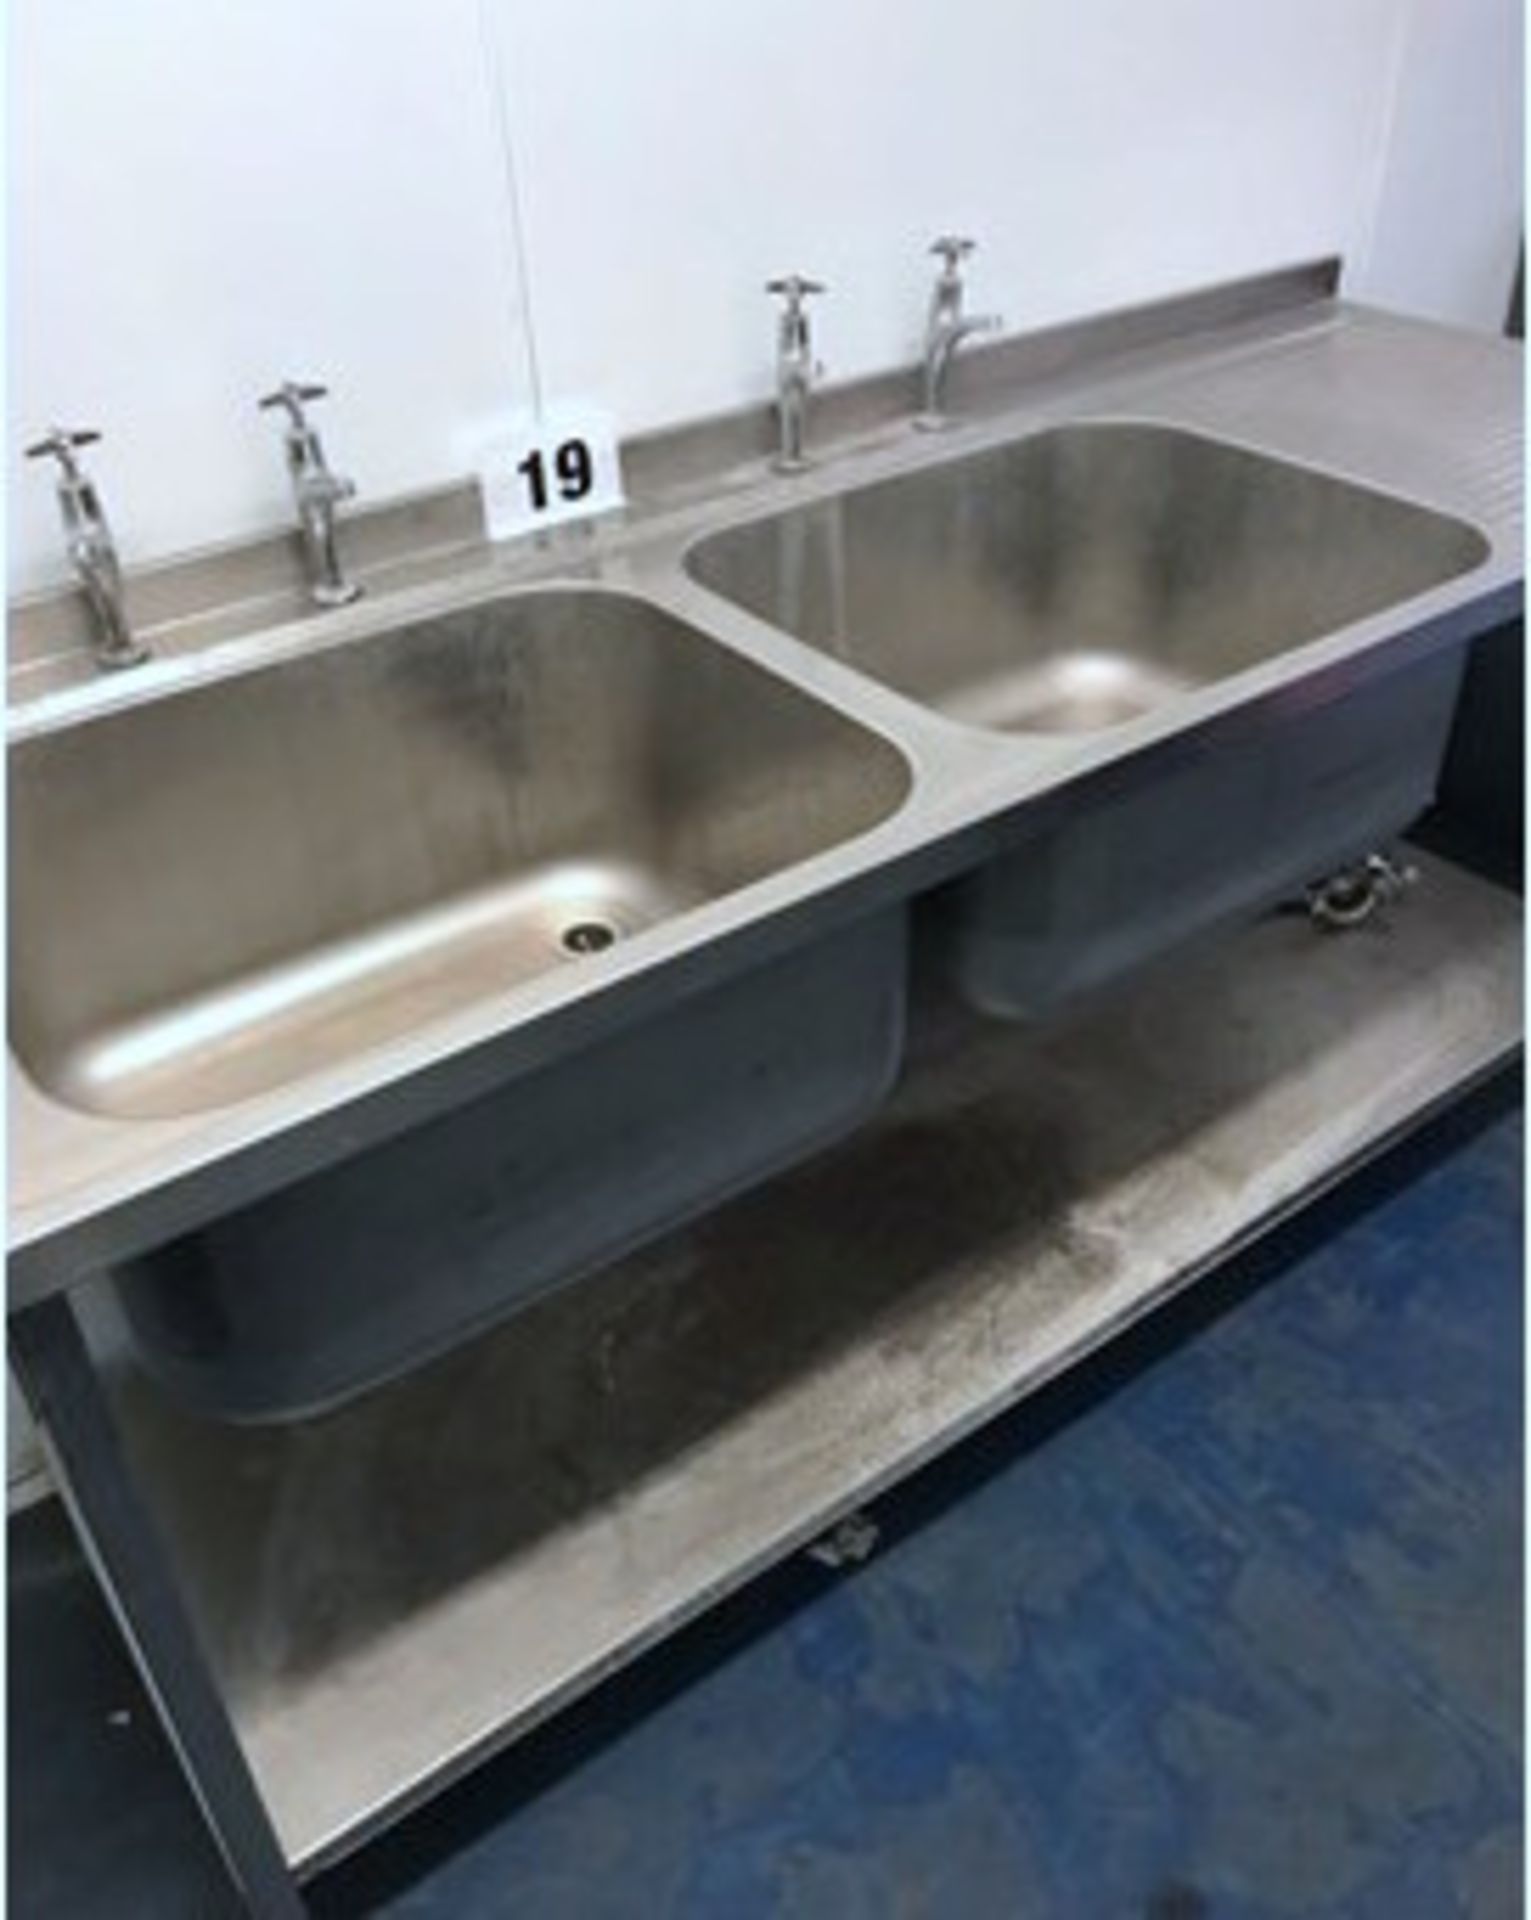 S/S Syspal double sink. Approx. 1800mm long x 865mm high LO £10 - Bild 3 aus 3